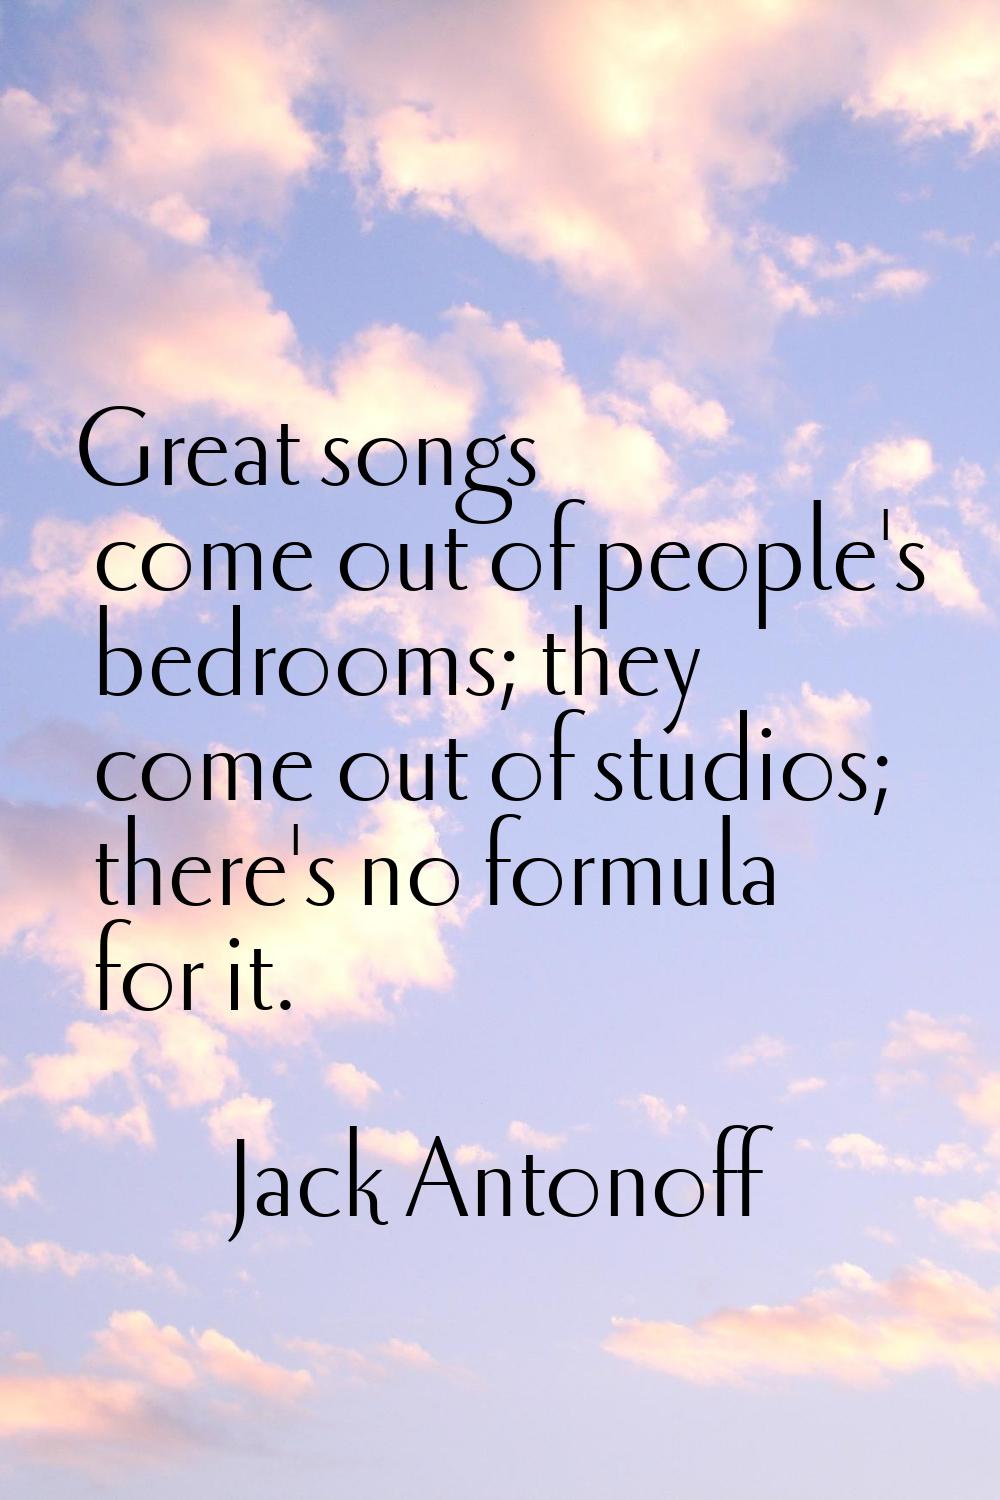 Great songs come out of people's bedrooms; they come out of studios; there's no formula for it.